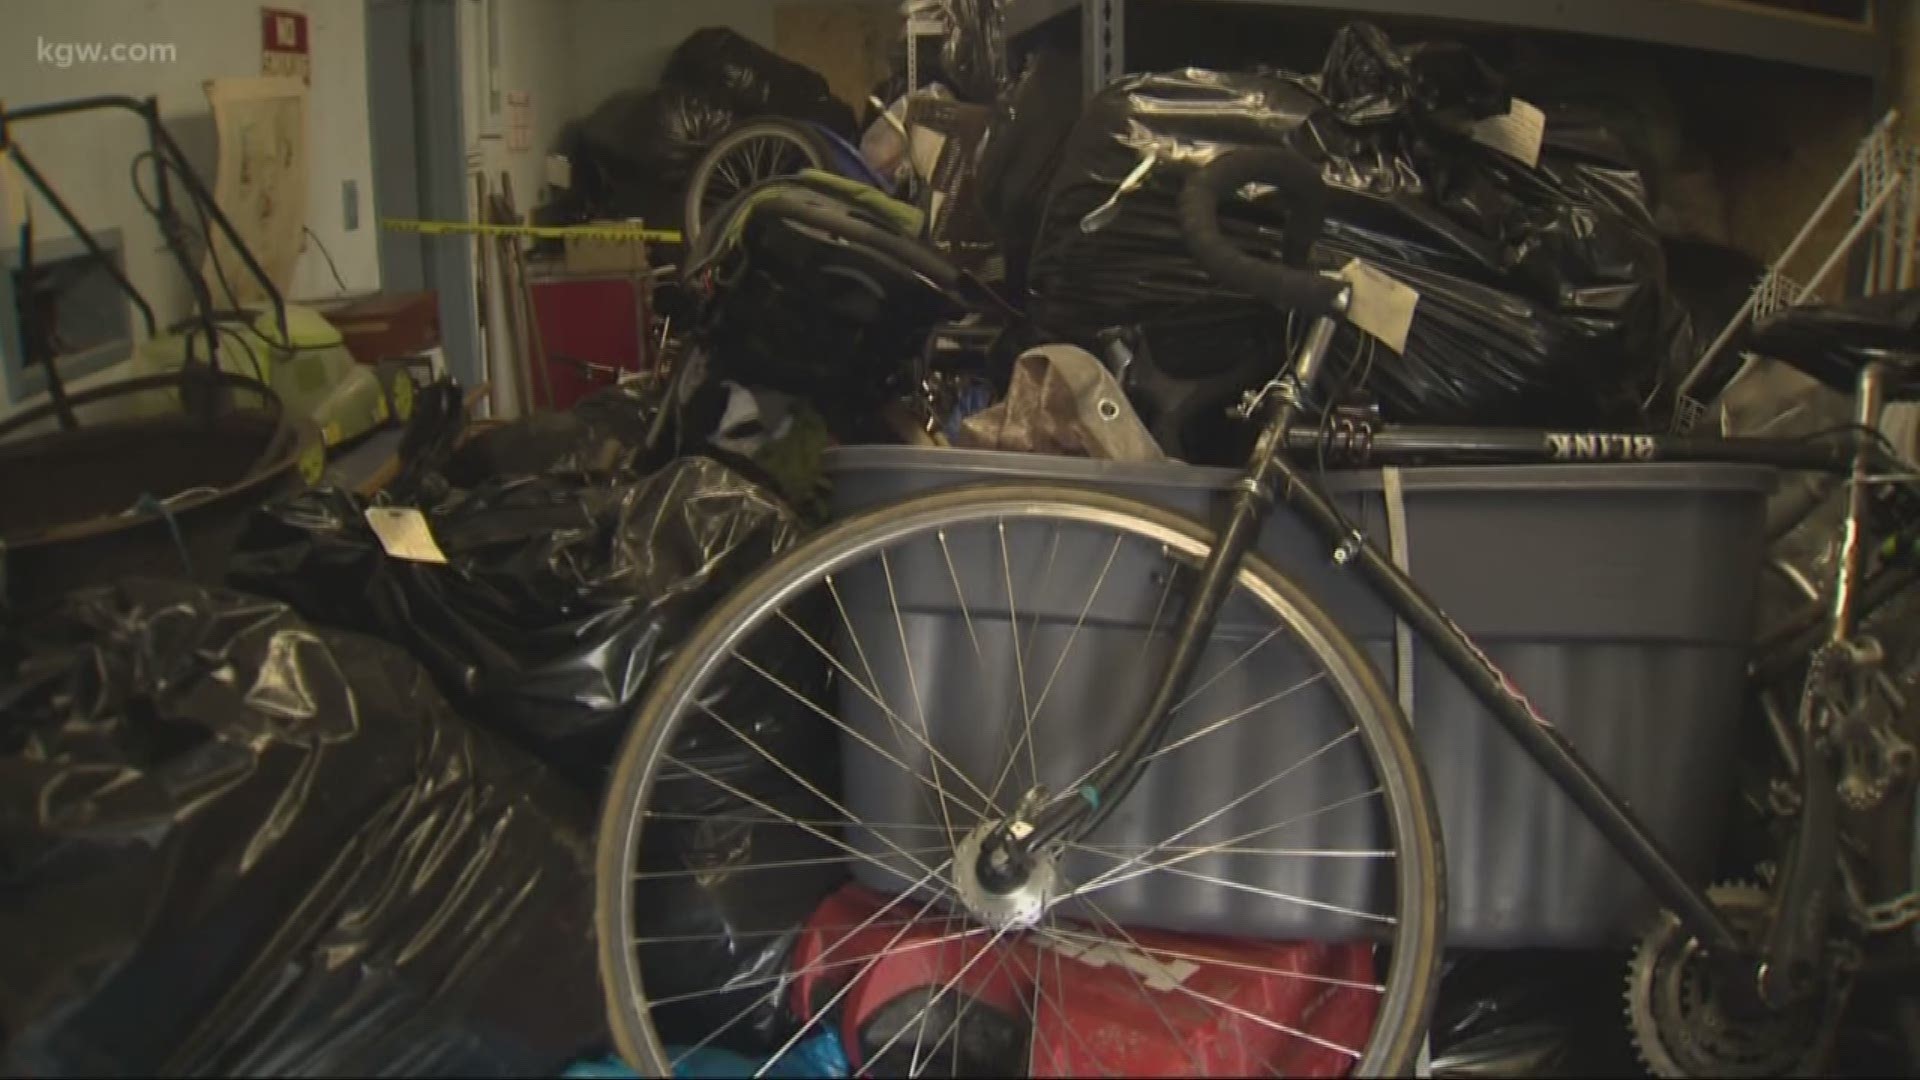 Portland will store homeless campers' belongings in a larger space.